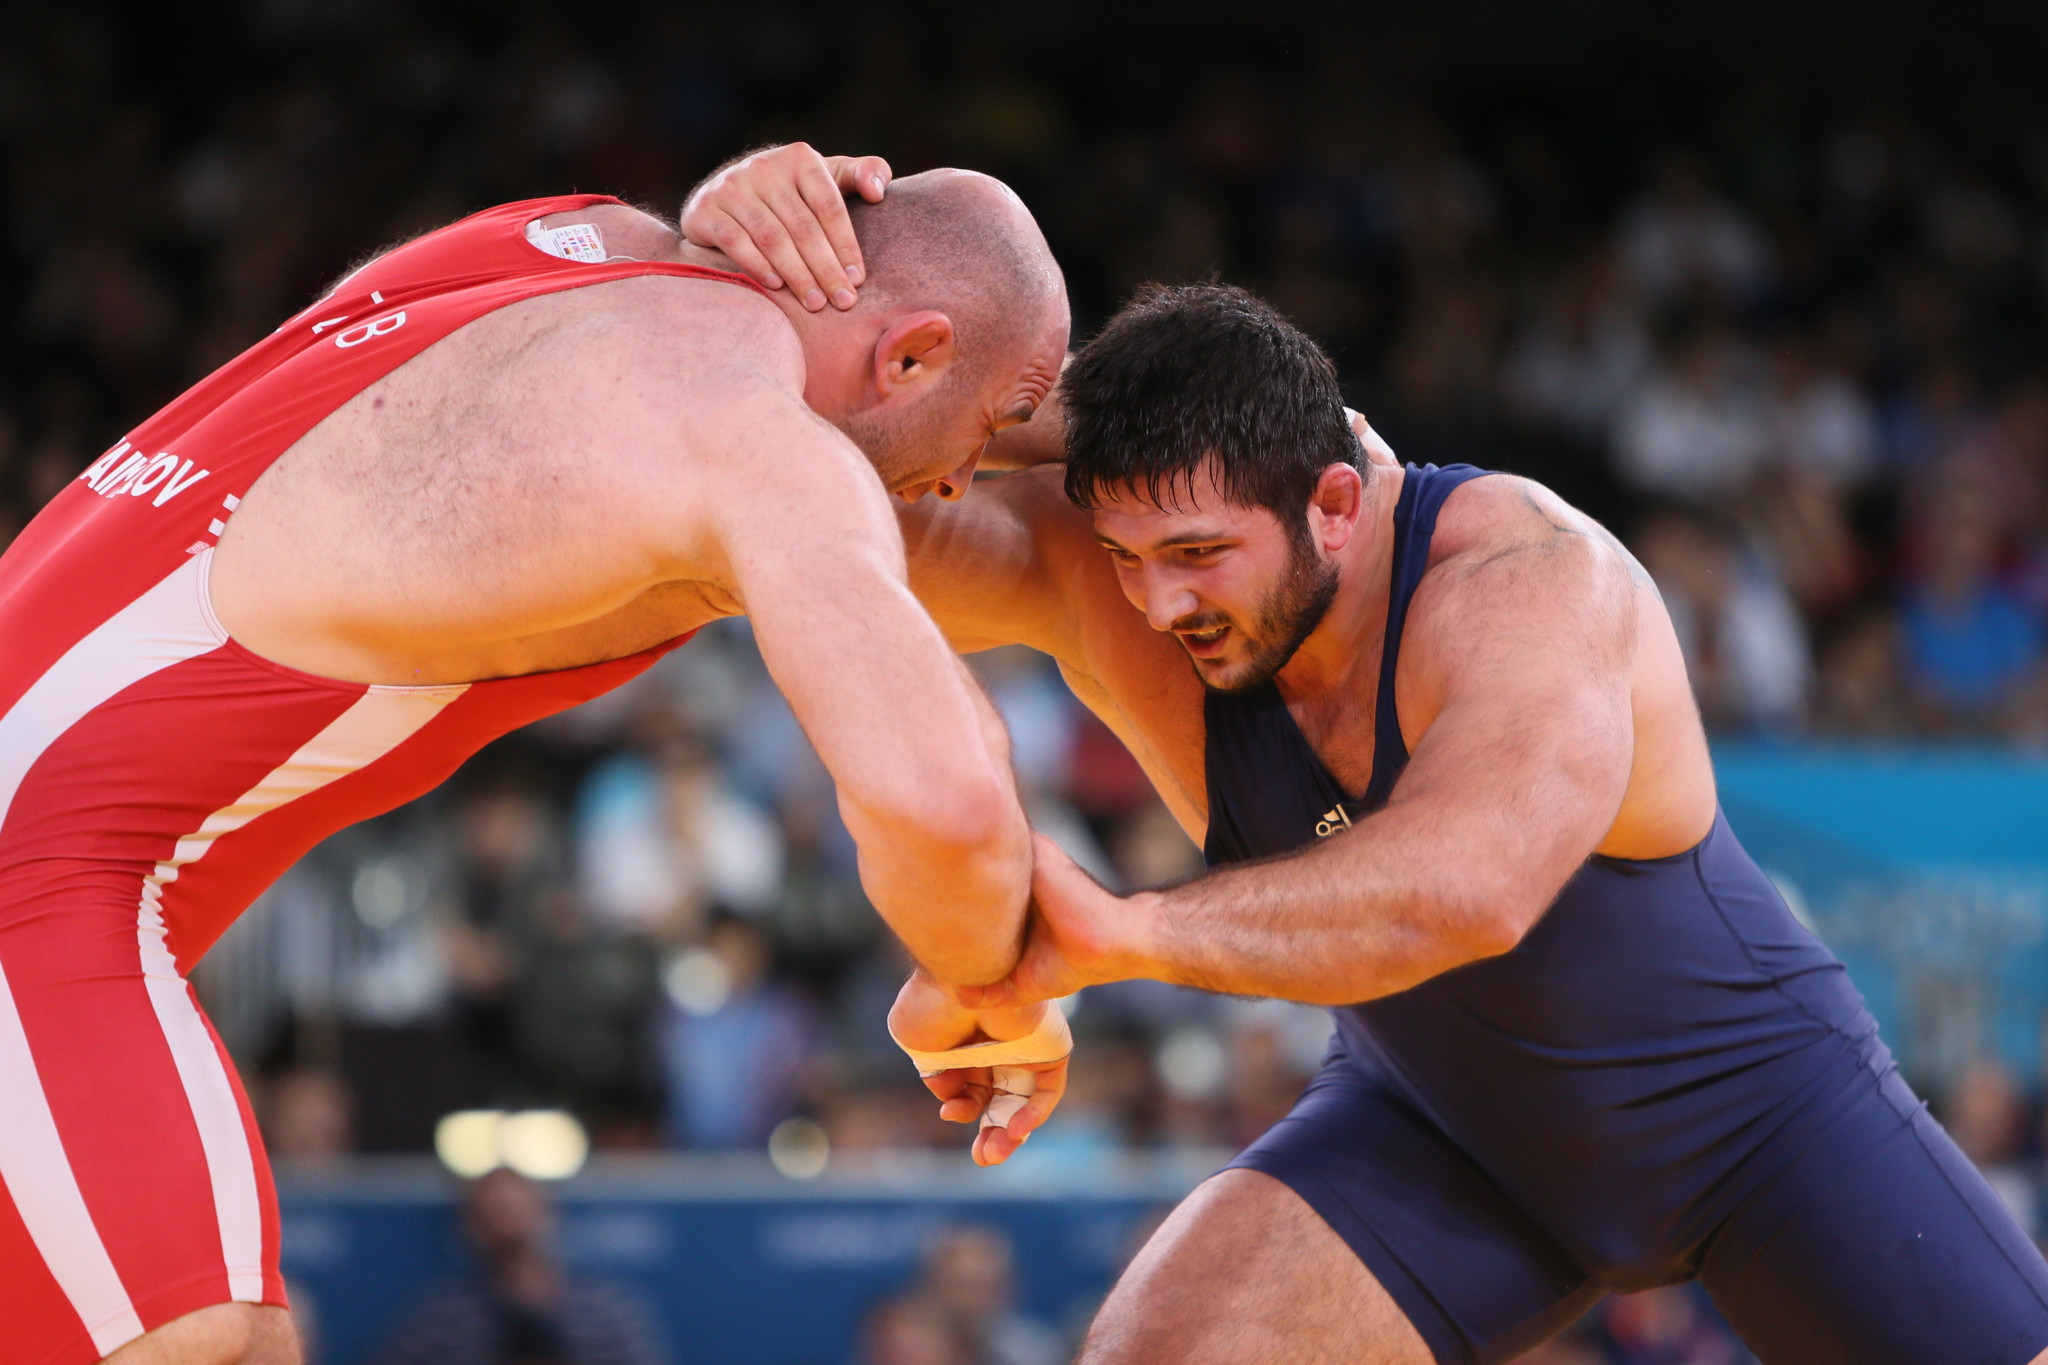 Davit Modzmanashvili has been stripped of the silver medal he claimed in the men's 120 kilograms freestyle wrestling event at the London 2012 Olympic Games ©Getty Images